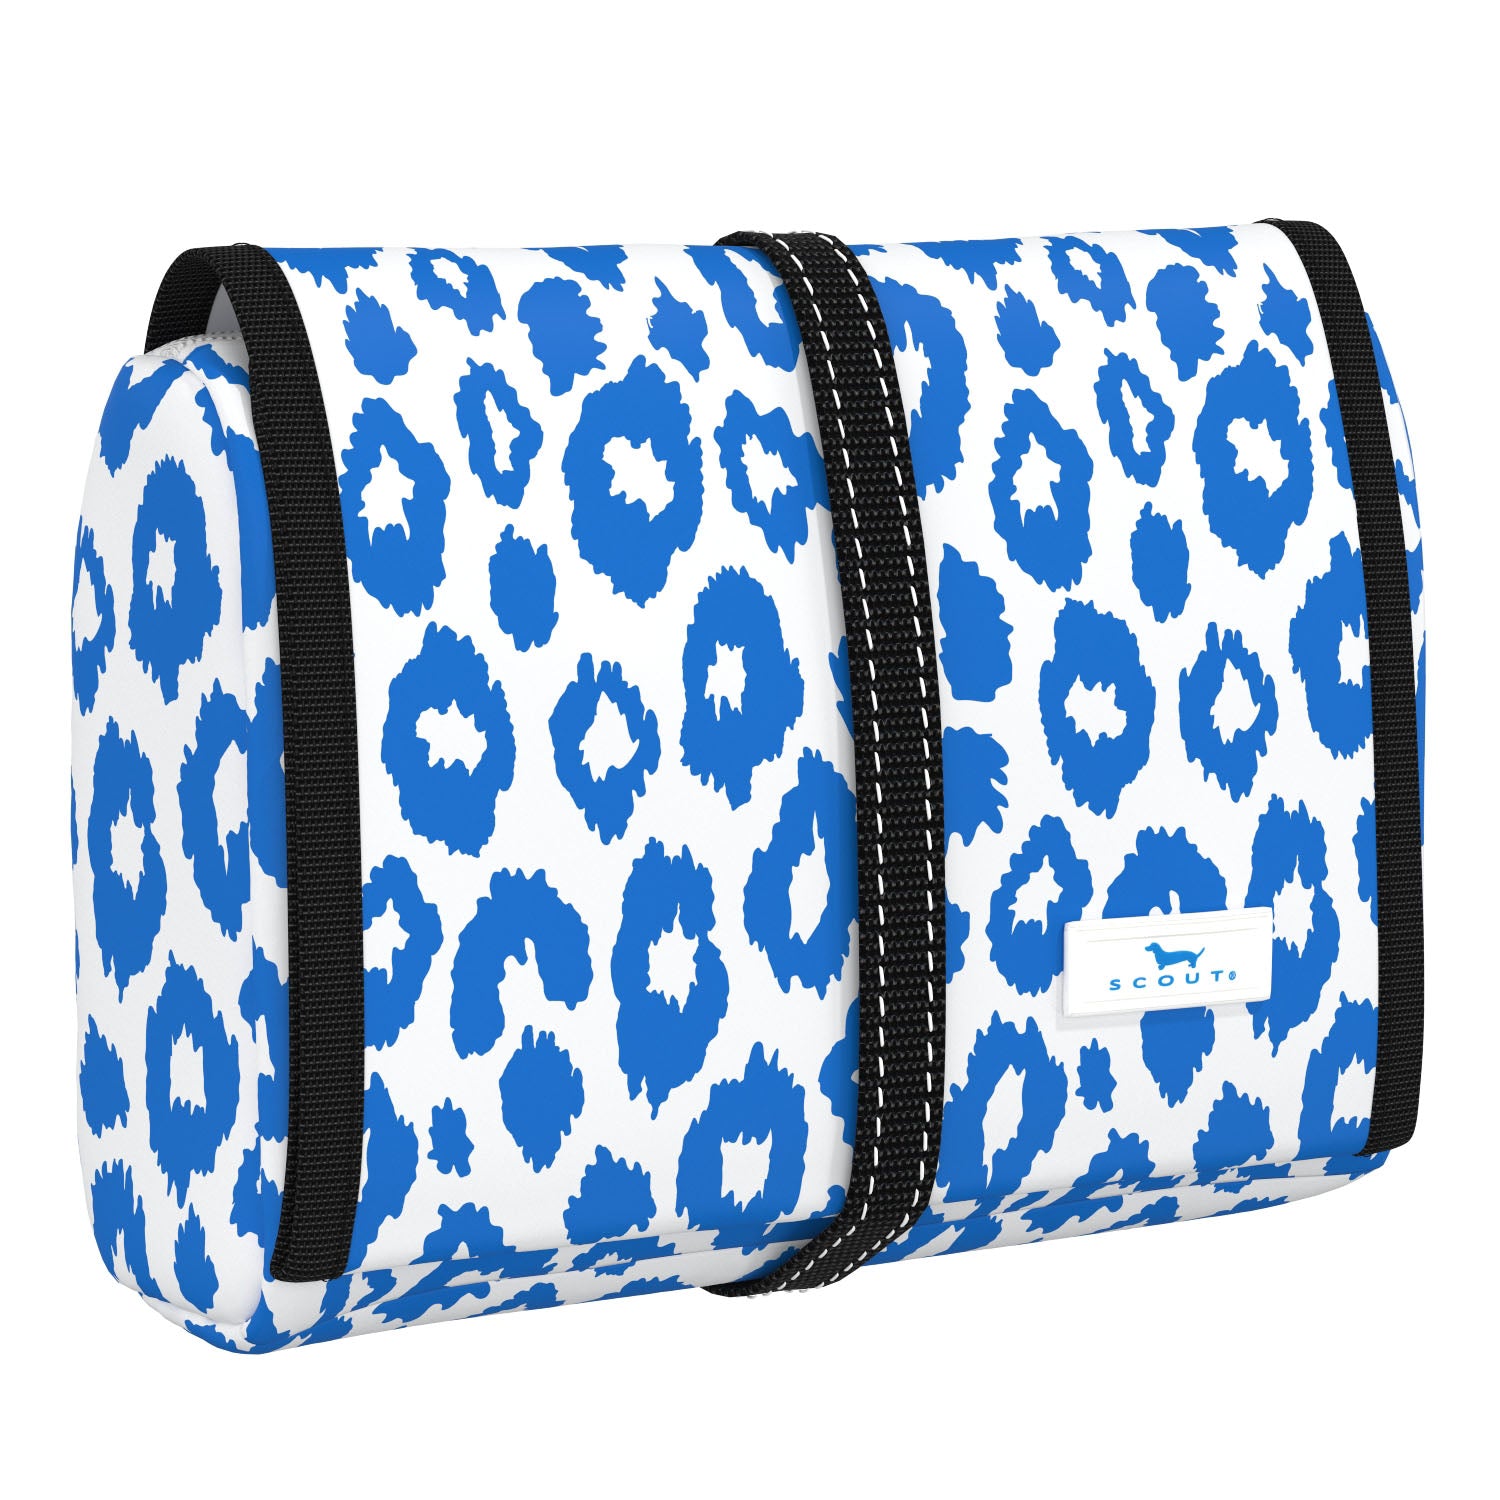 Scout Beauty Burrito Toiletry Bag Travel Accessories in Pawlease at Wrapsody